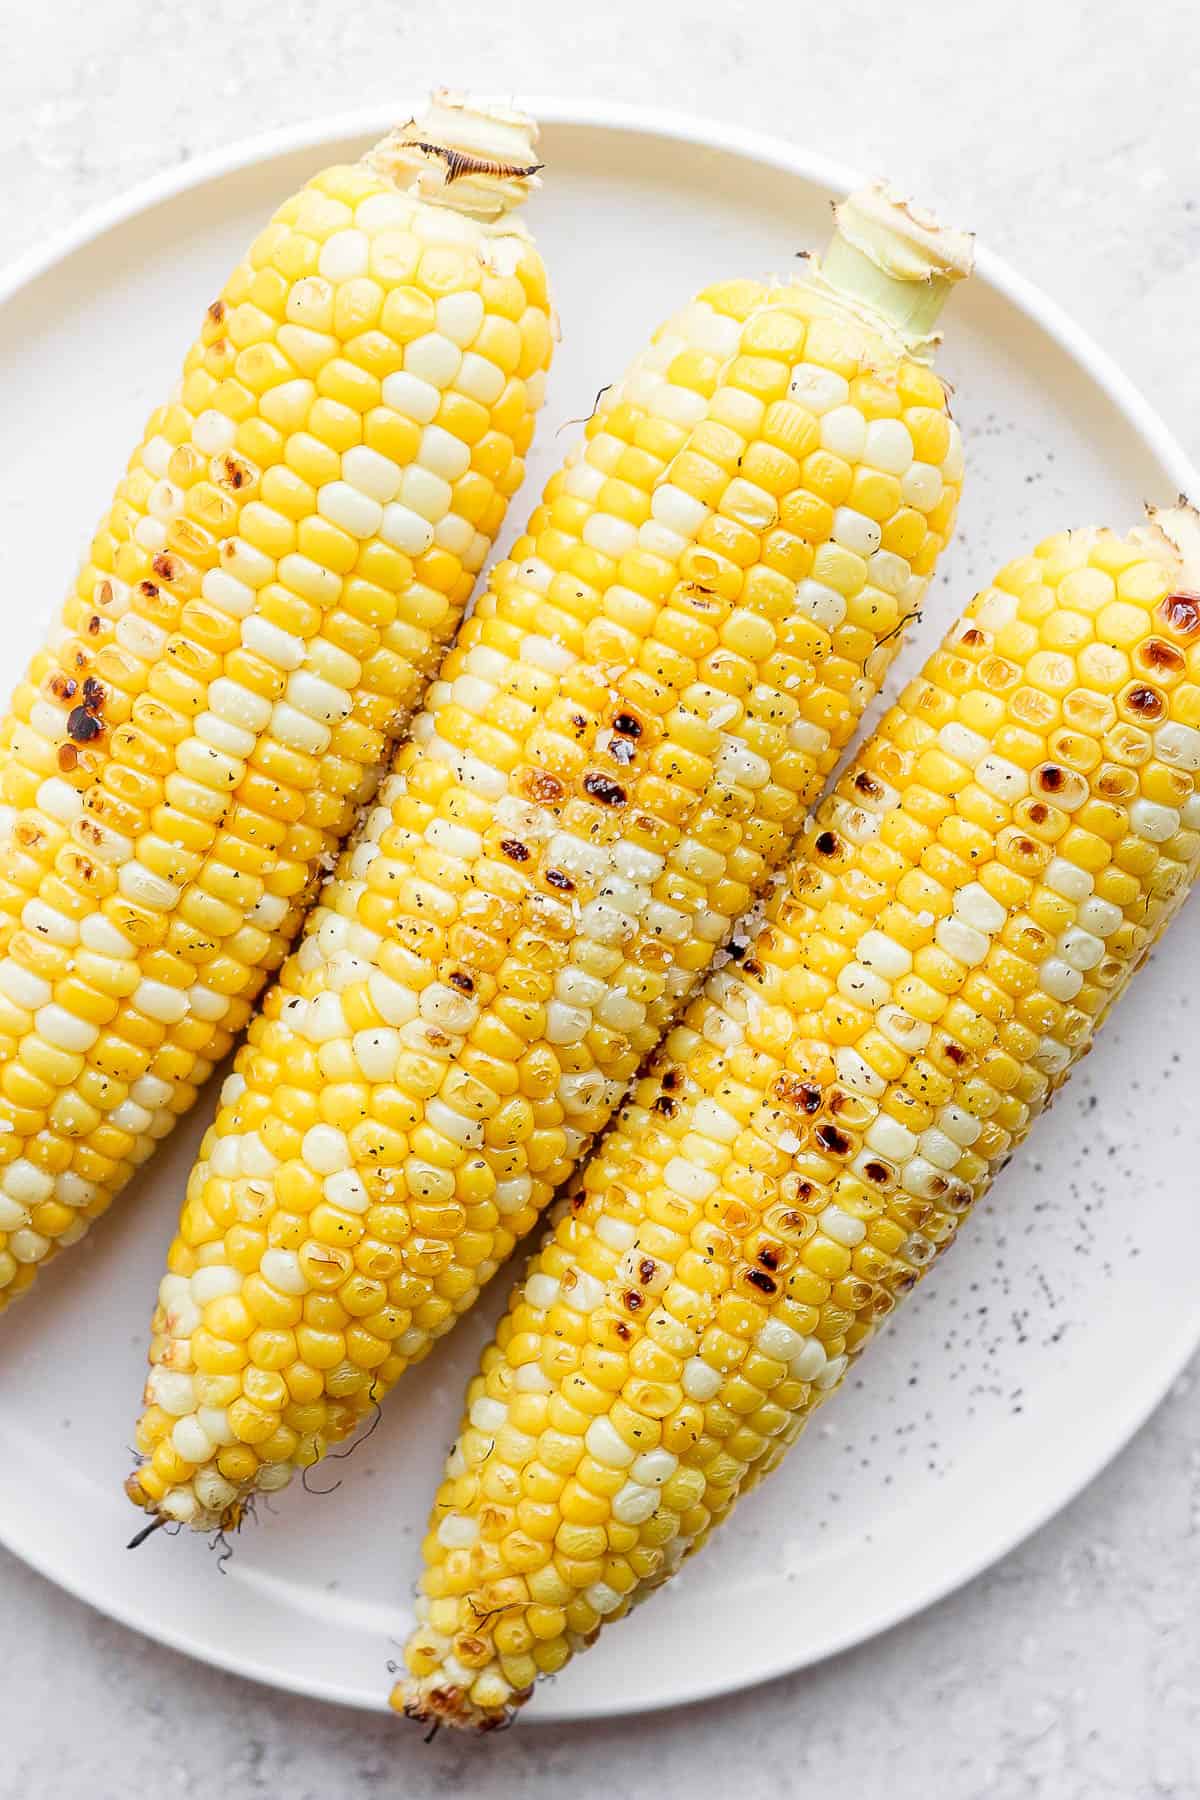 3 ears of grilled corn on the cob on a plate.